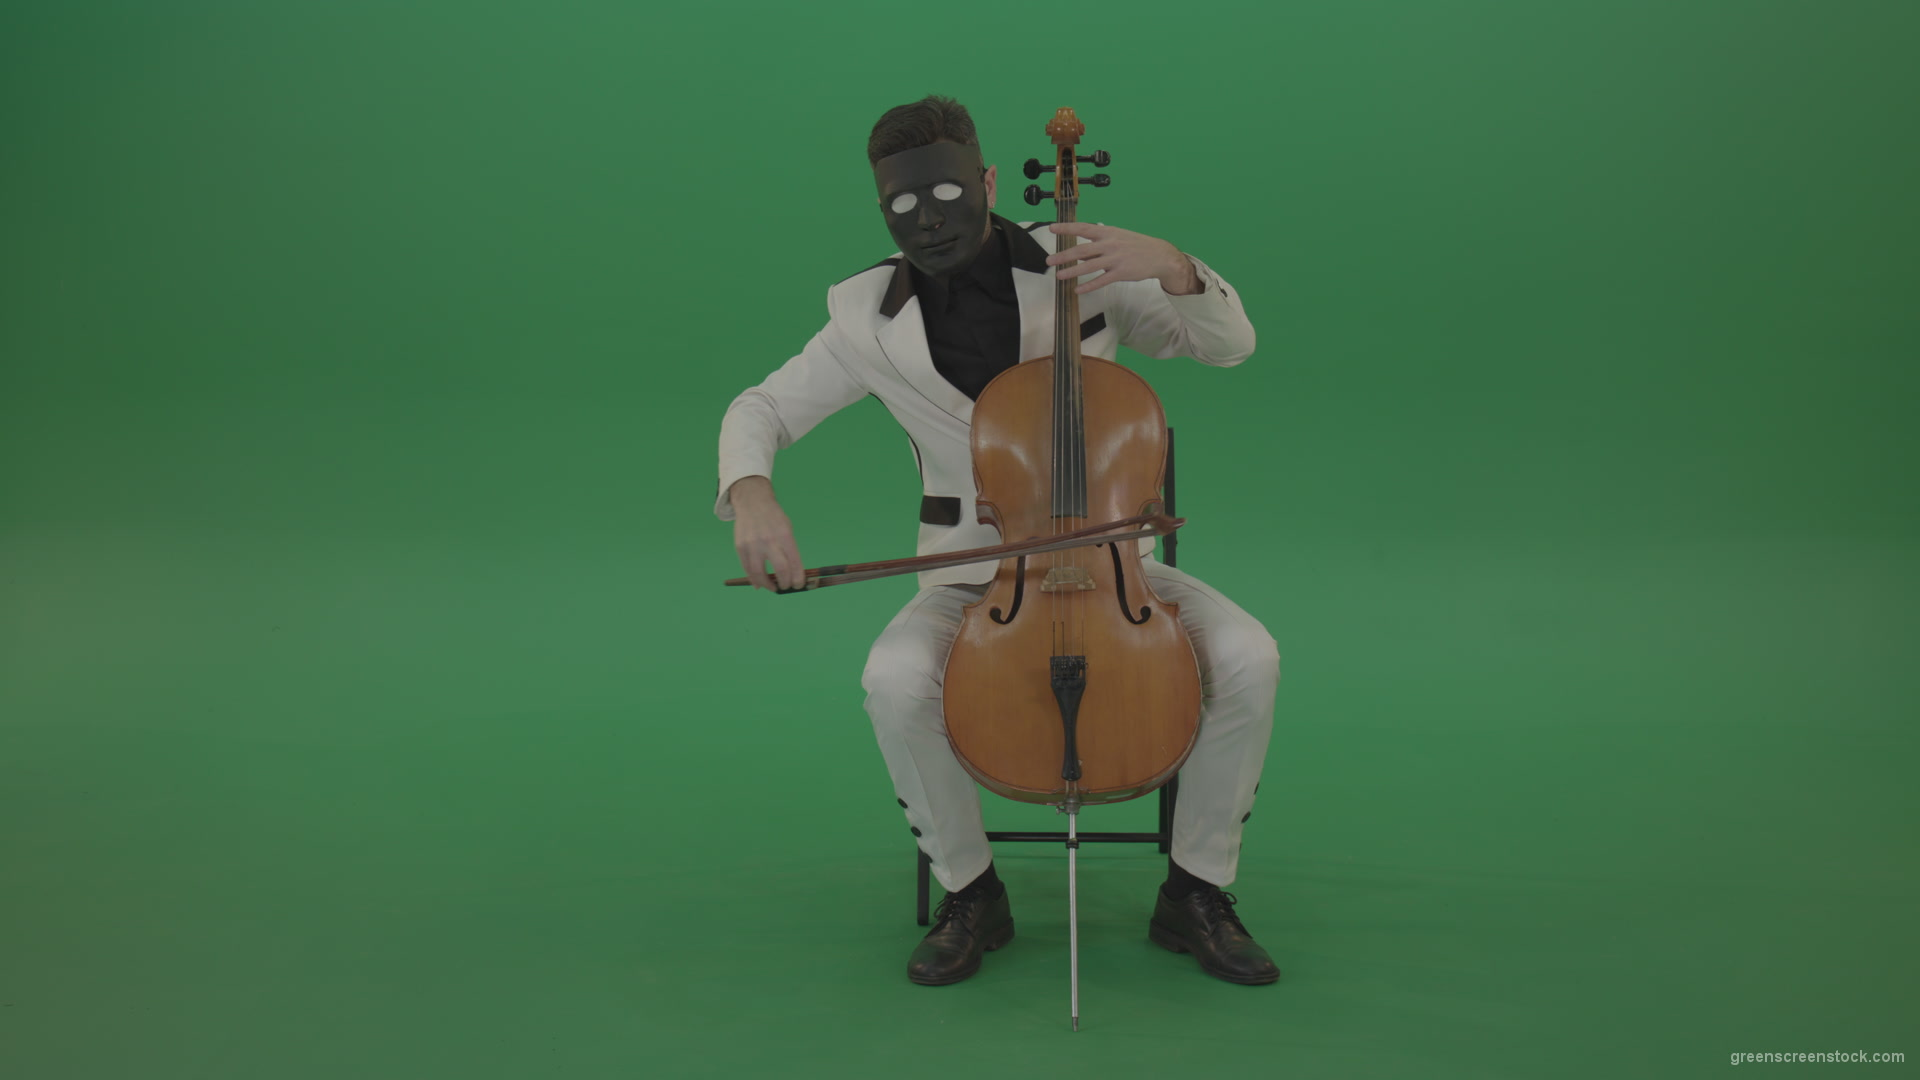 Man-plays-on-a-cello-in-a-white-suit-and-a-black-mask-with-white-eyes_009 Green Screen Stock